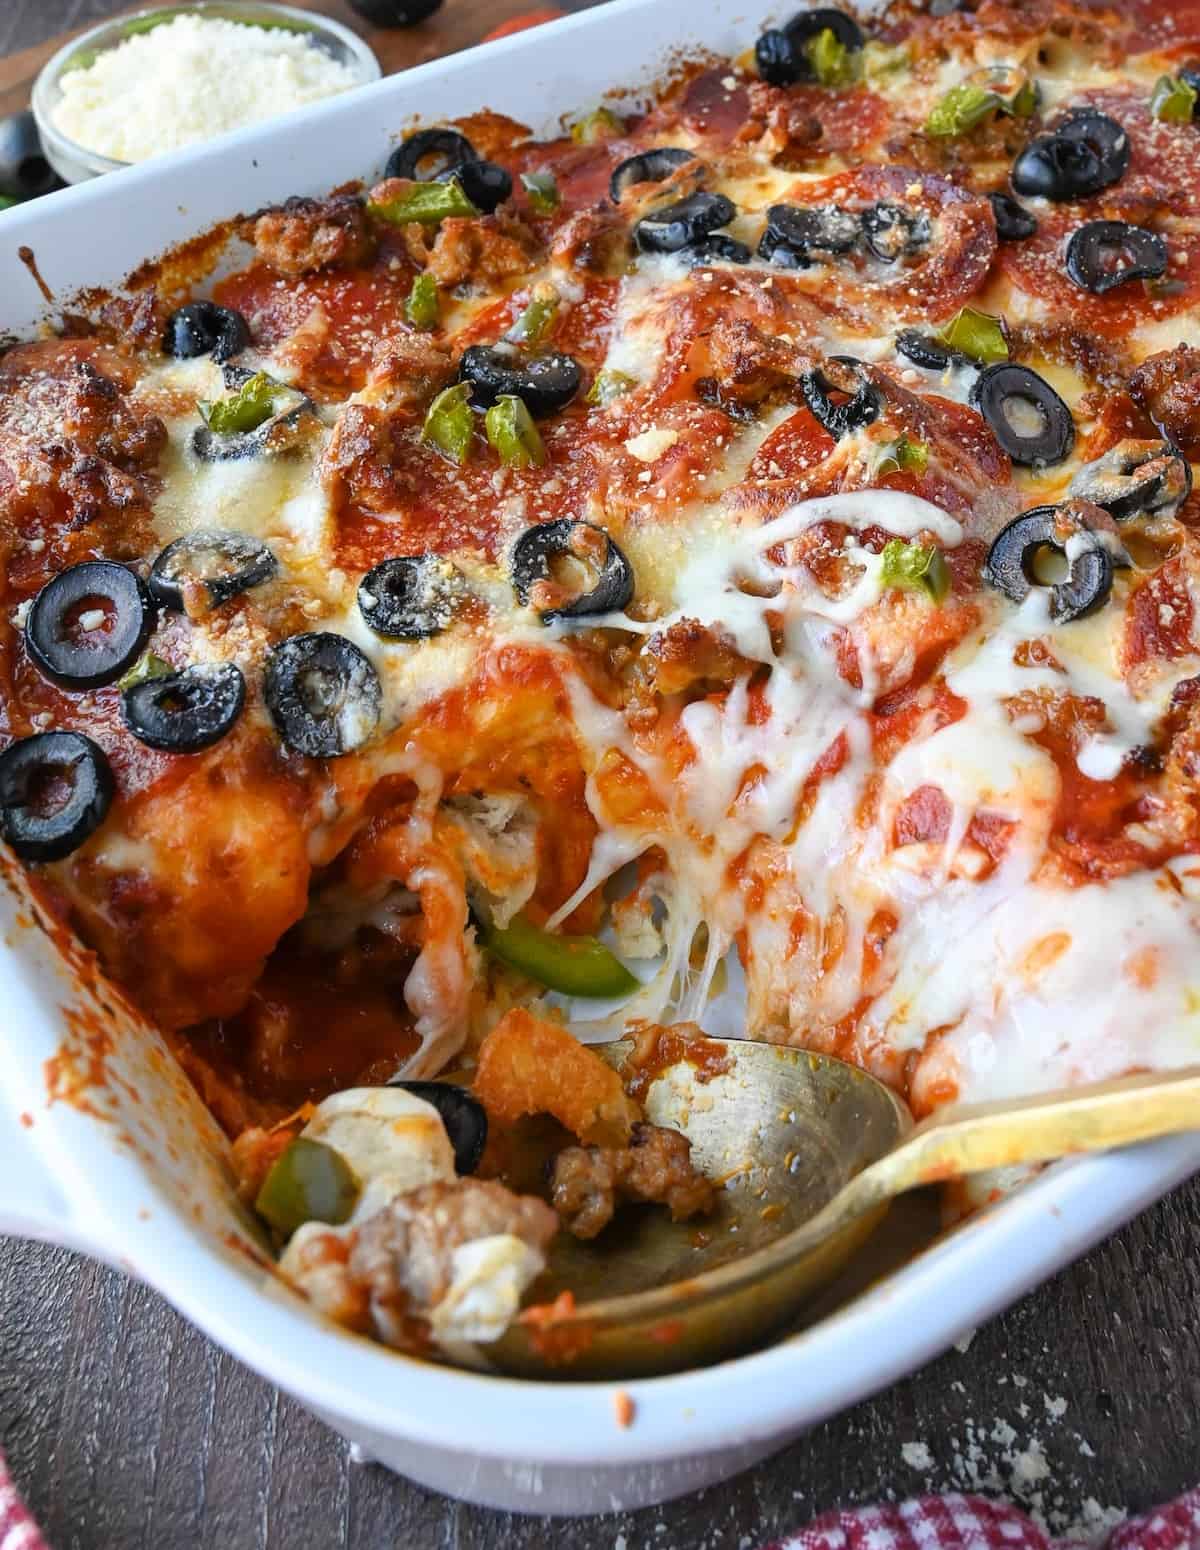 A spoon resting in a casserole dish filled with pizza bake.